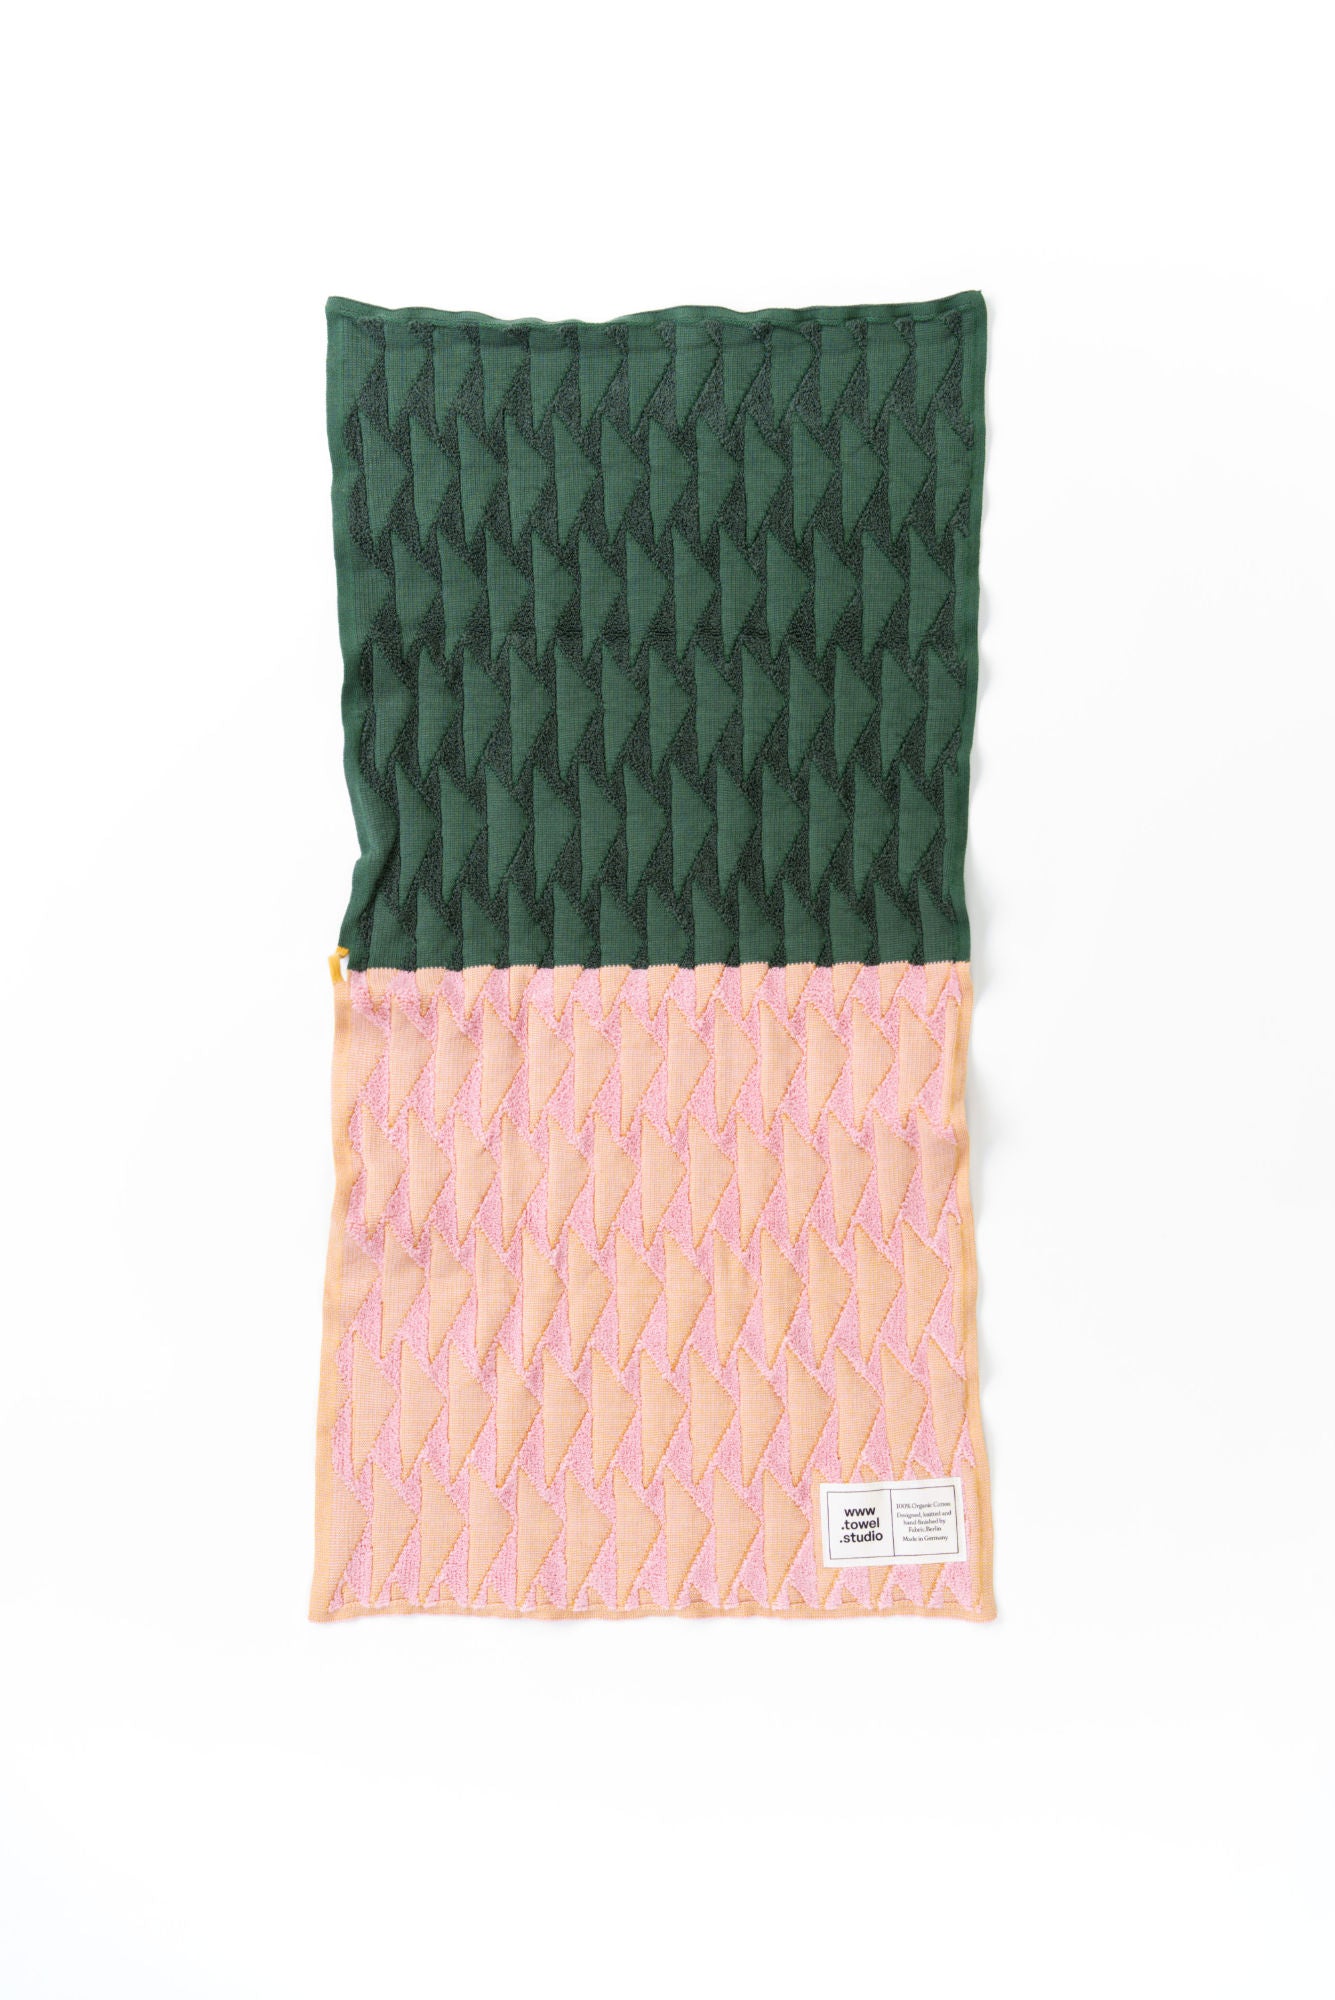 Forest Towel in Apricot Leaf